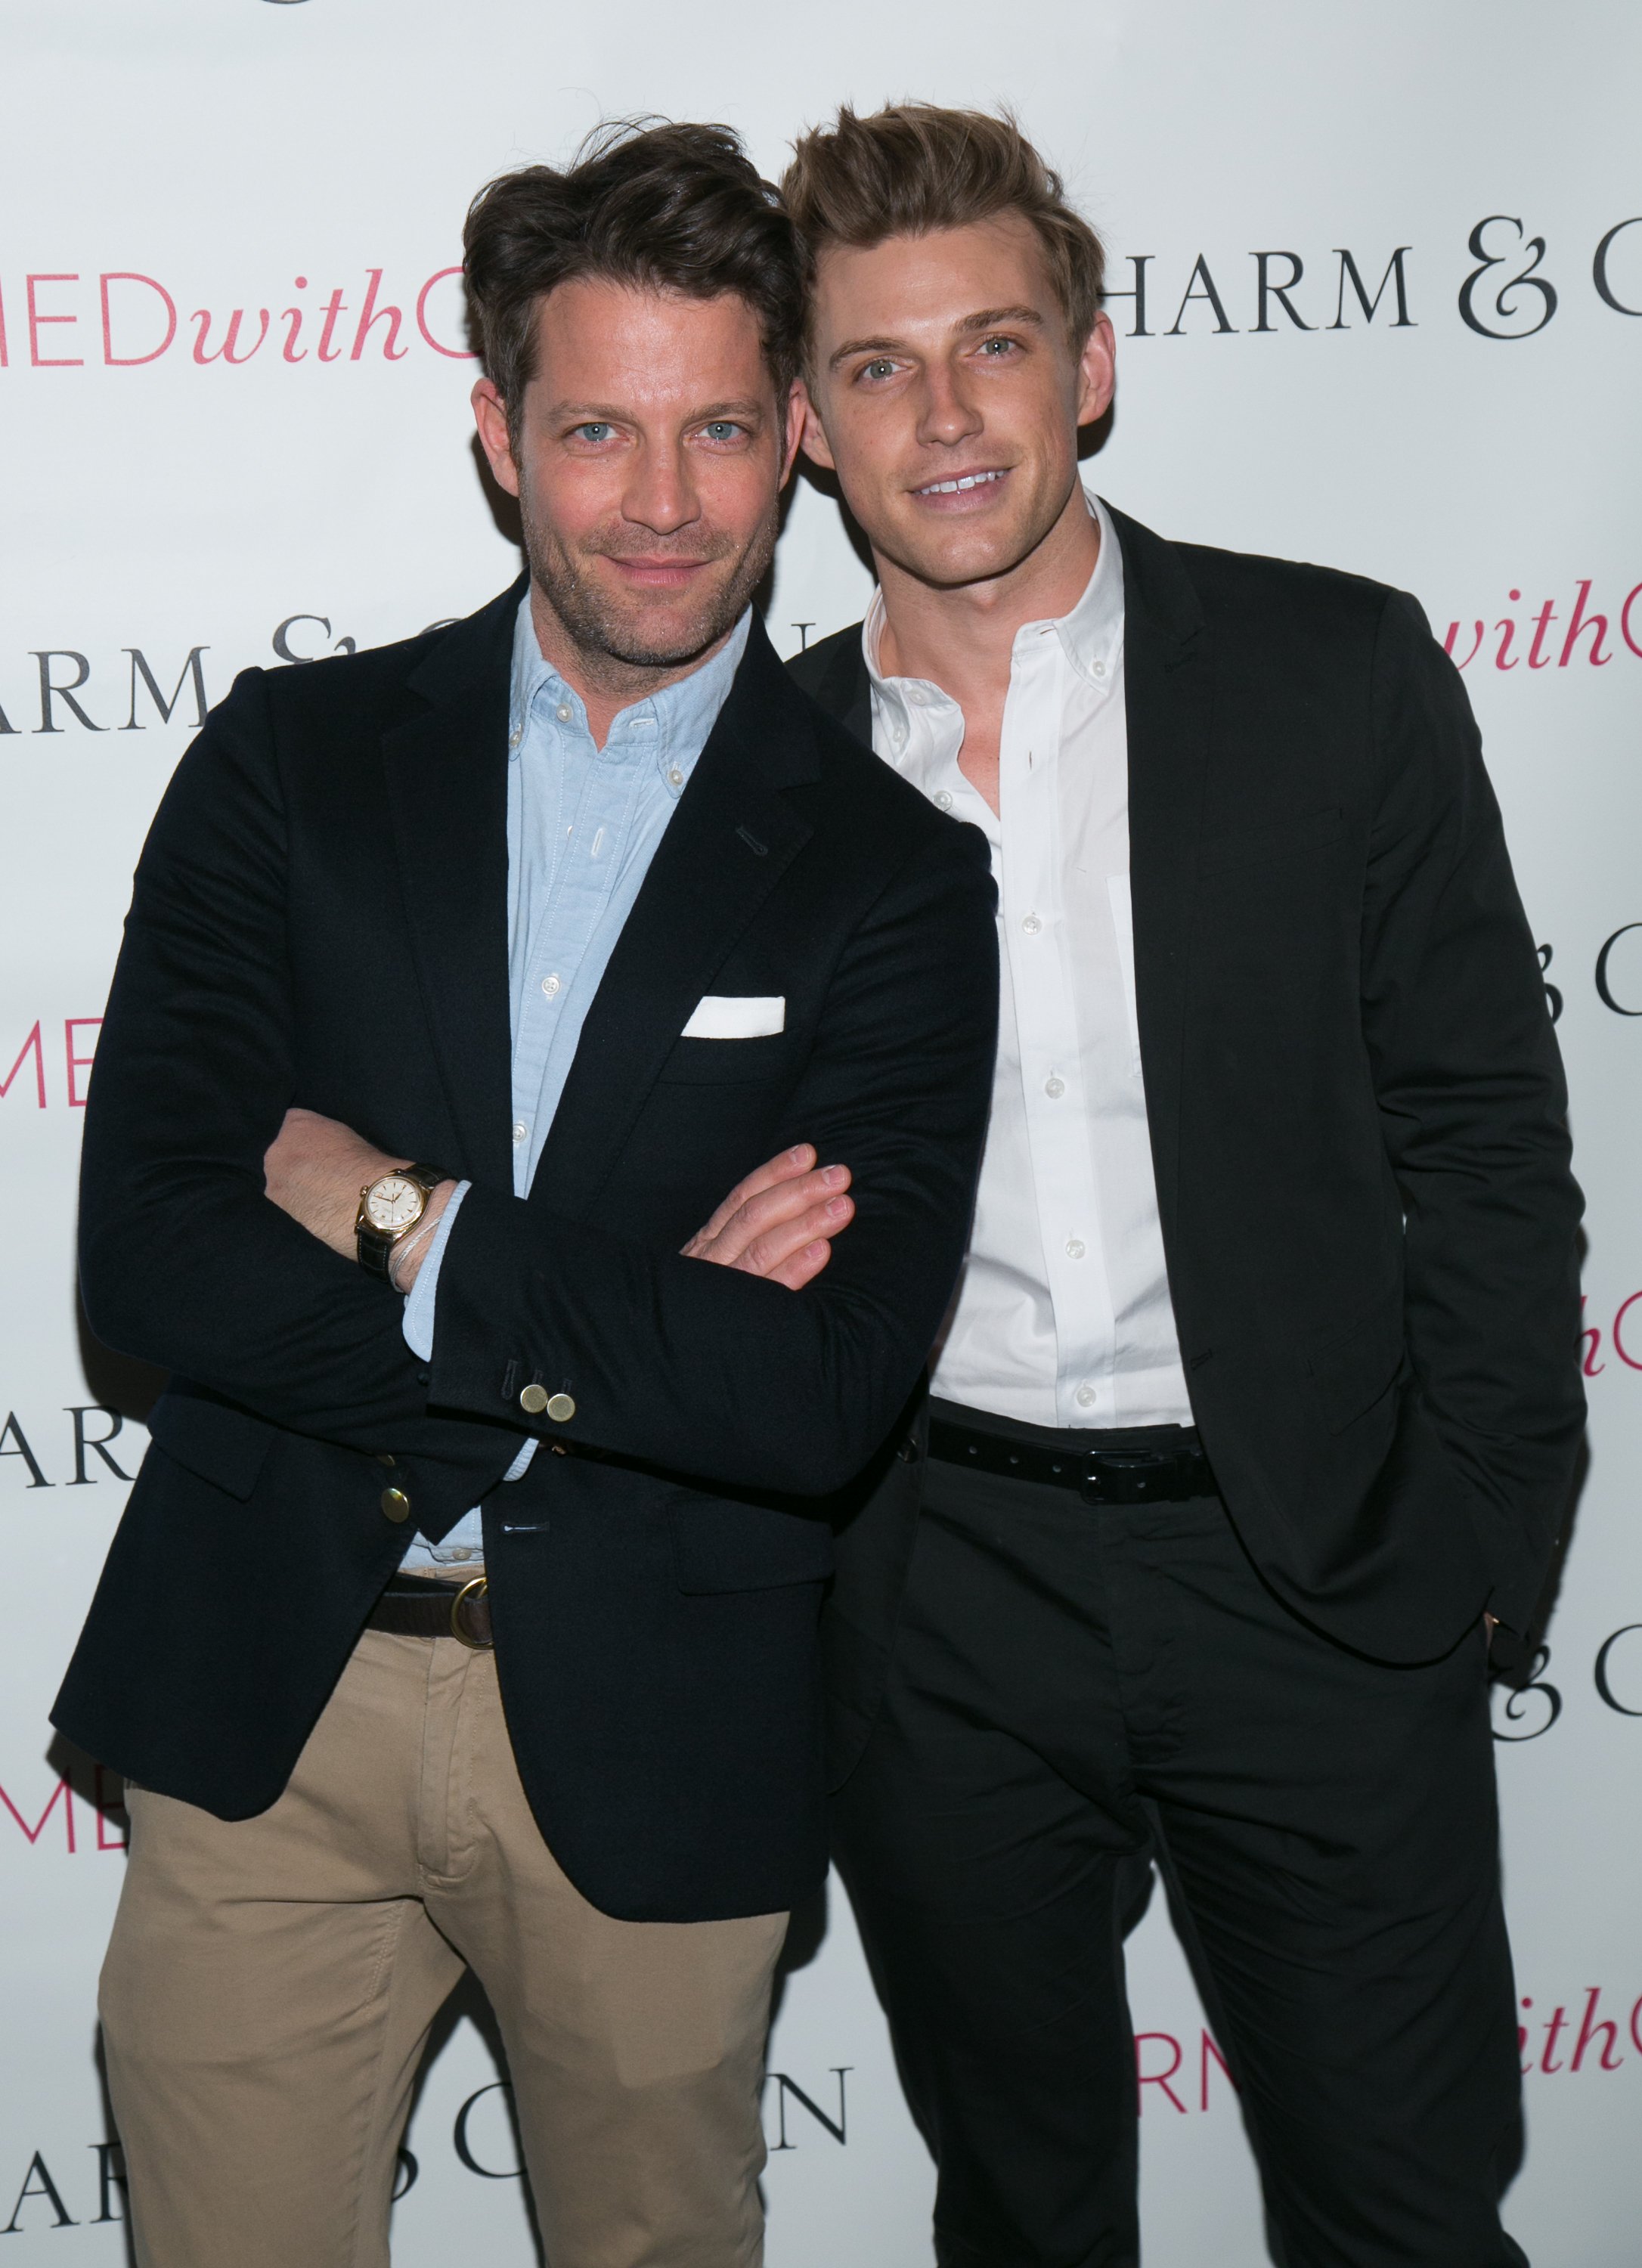  Interior designer Nate Berkus and Jeremiah Brent on April 23, 2014, in New York City. | Source: Getty Images